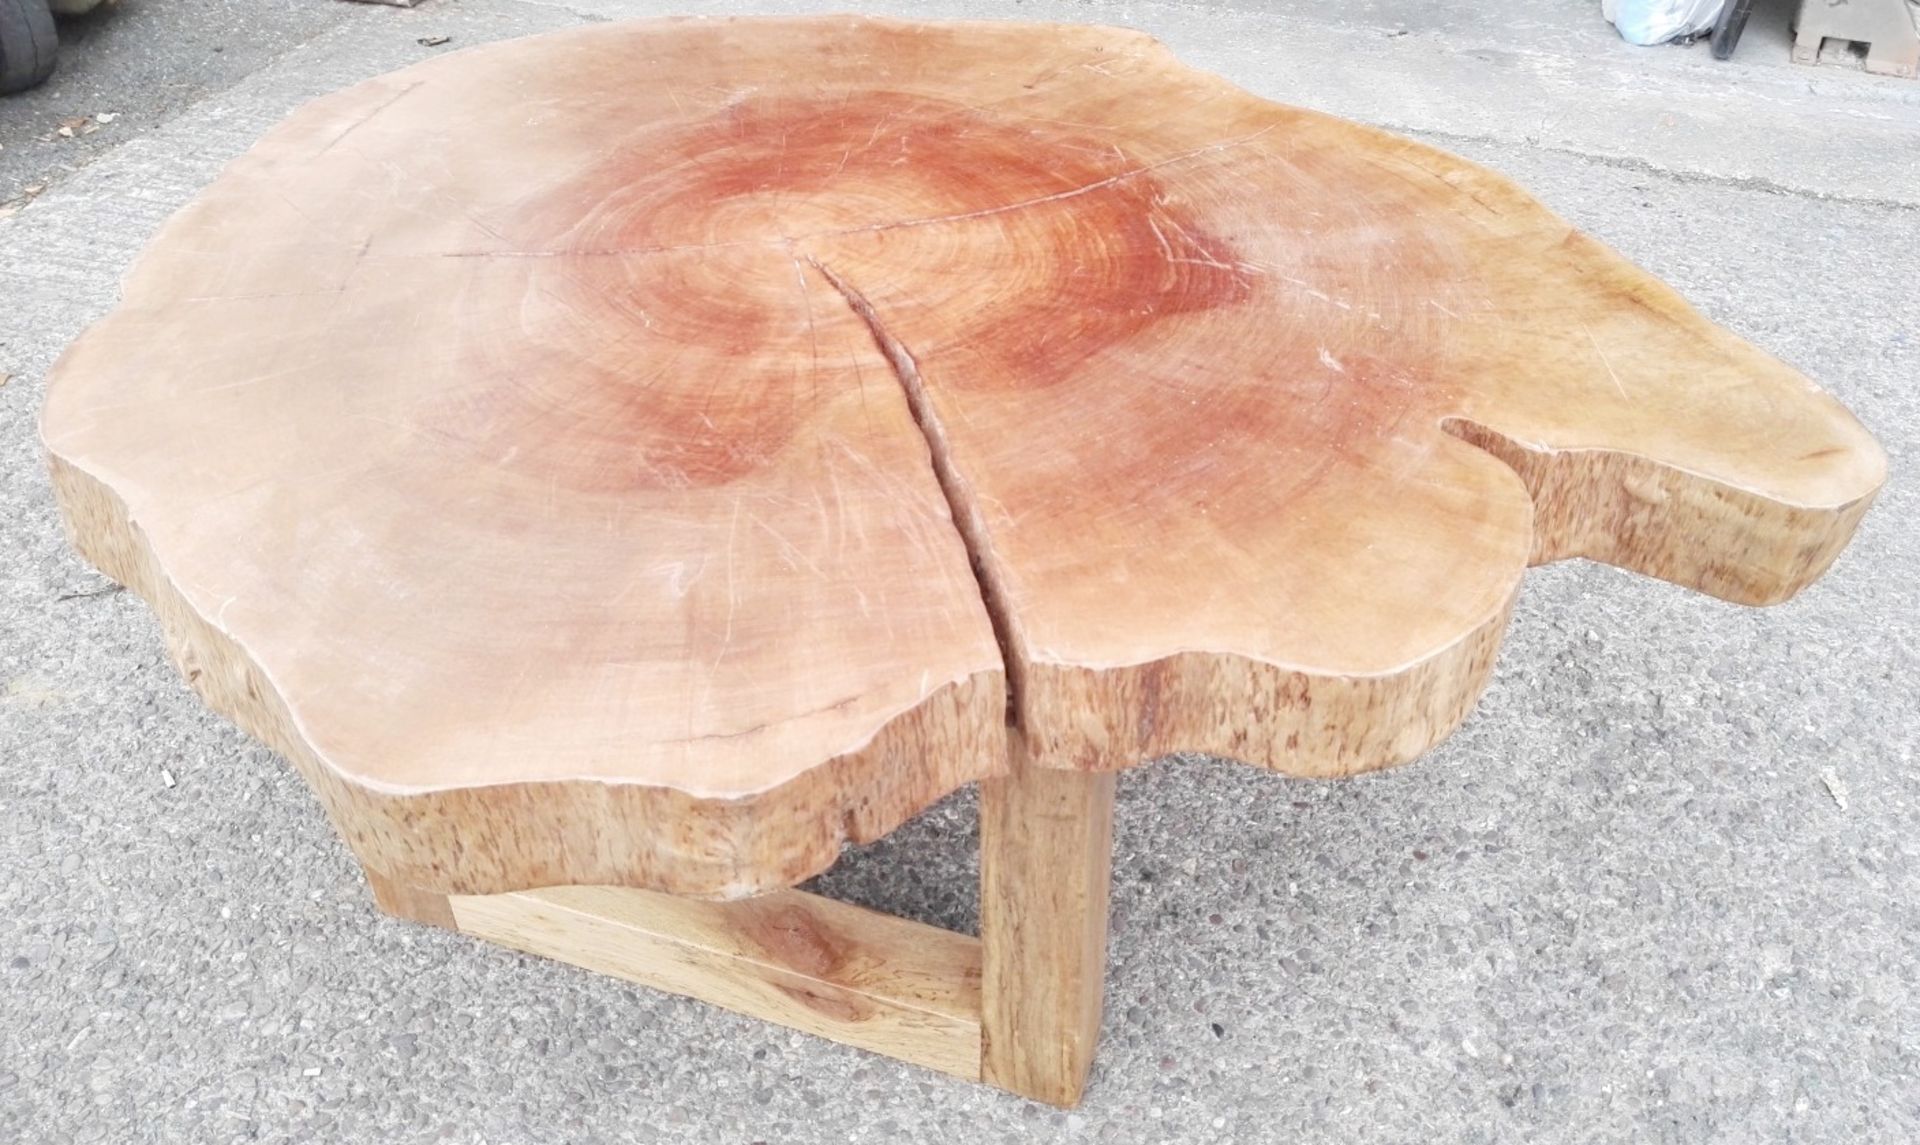 1 x Unique Reclaimed Solid Tree Trunk Coffee Table - Dimensions (approx): W152 x D129 x H63.3cm - Image 3 of 6